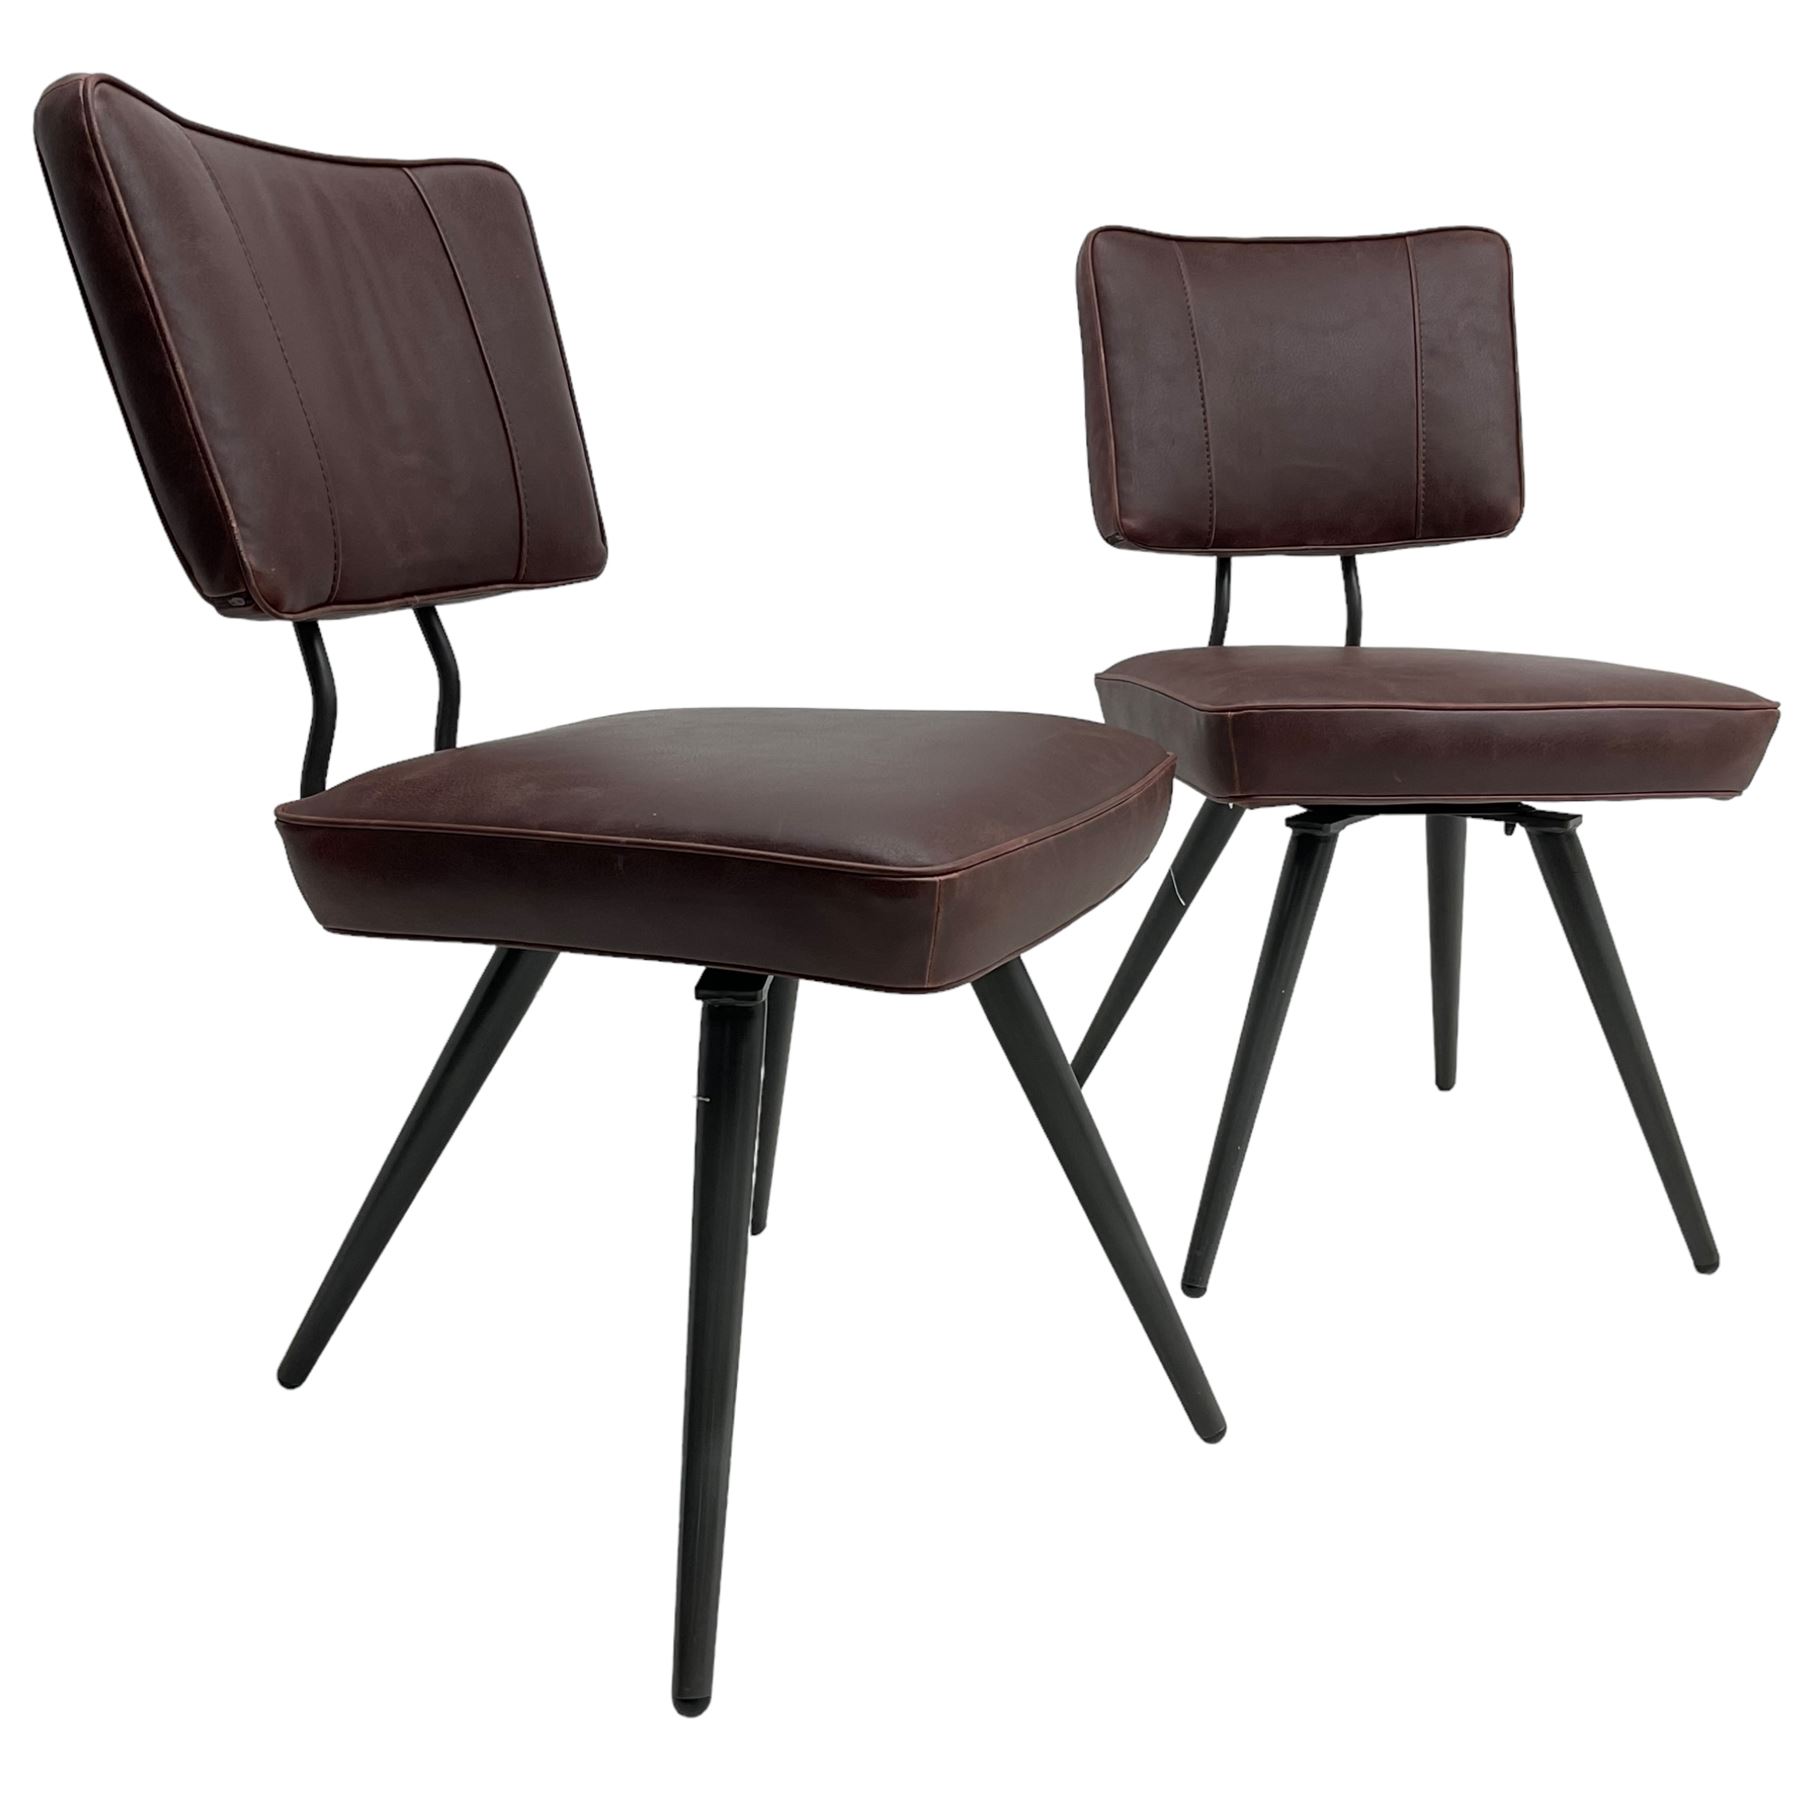 Barker & Stonehouse - pair of 'Sawyer' swivel dining chairs - Image 3 of 4